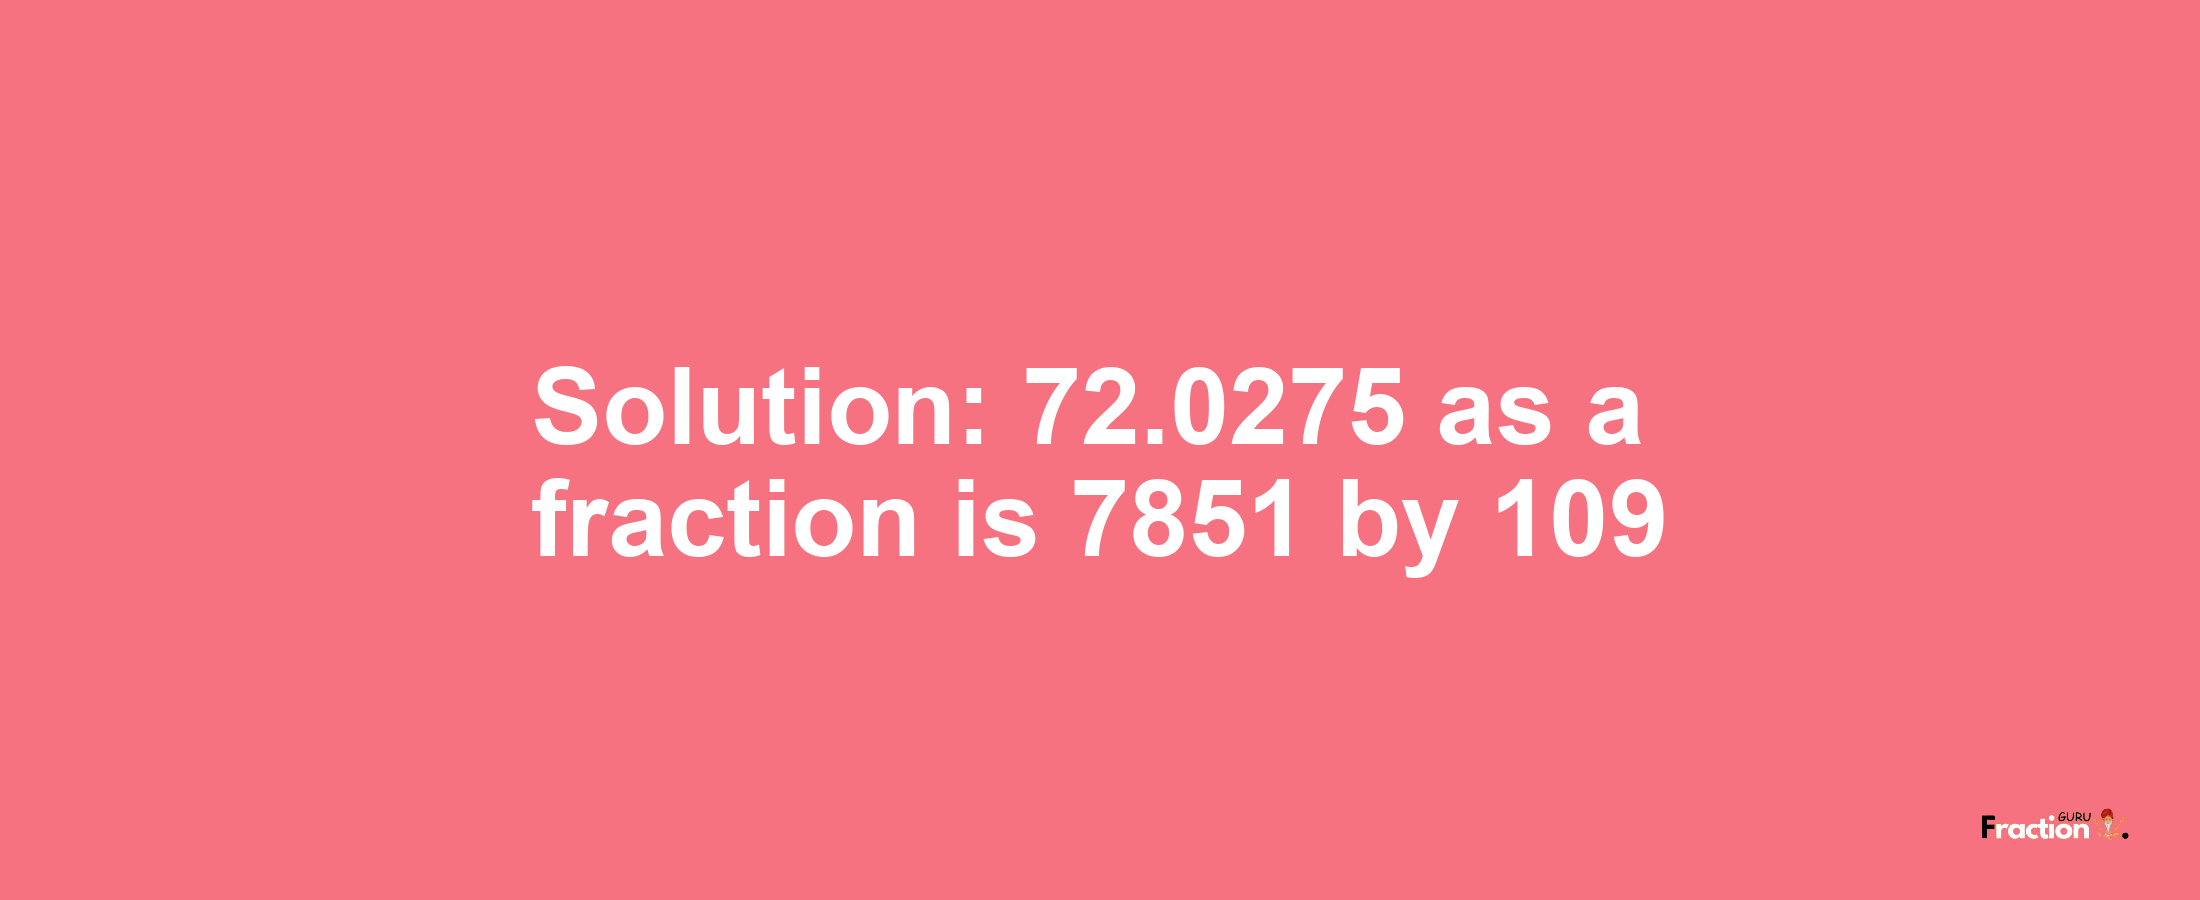 Solution:72.0275 as a fraction is 7851/109